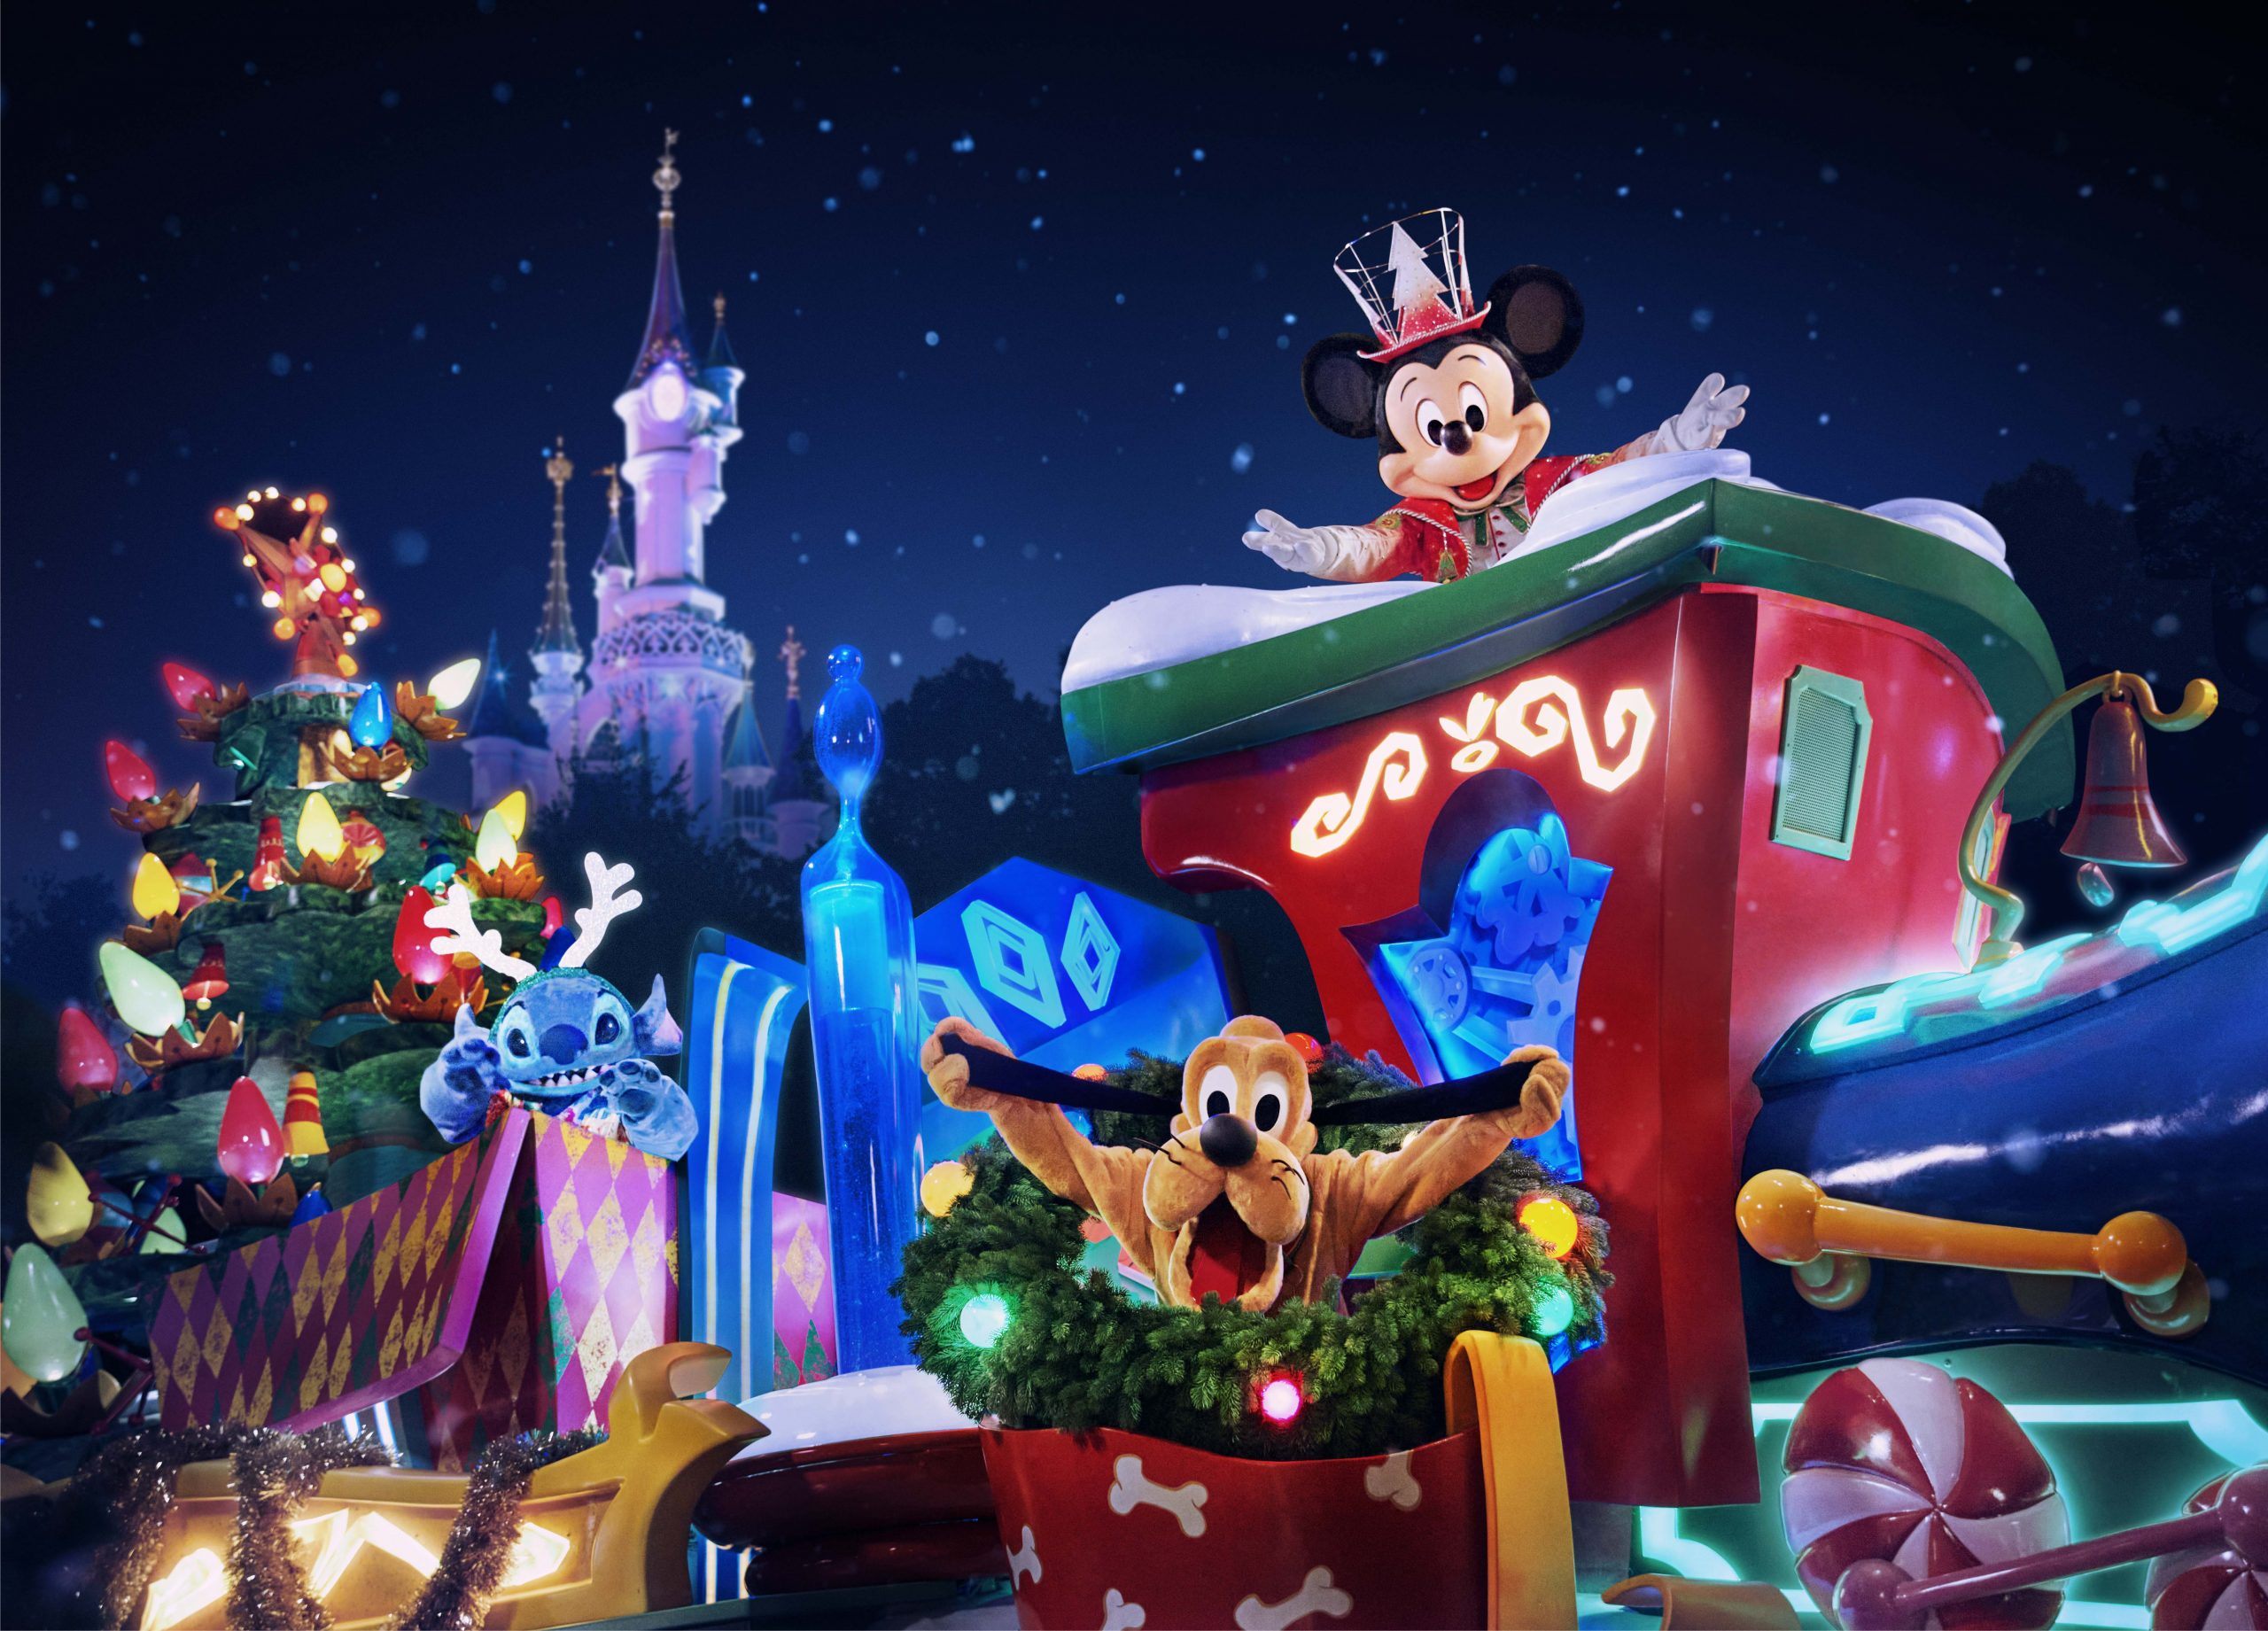 Disneyland Paris Photo Collection: Castle, Christmas Decorations and More